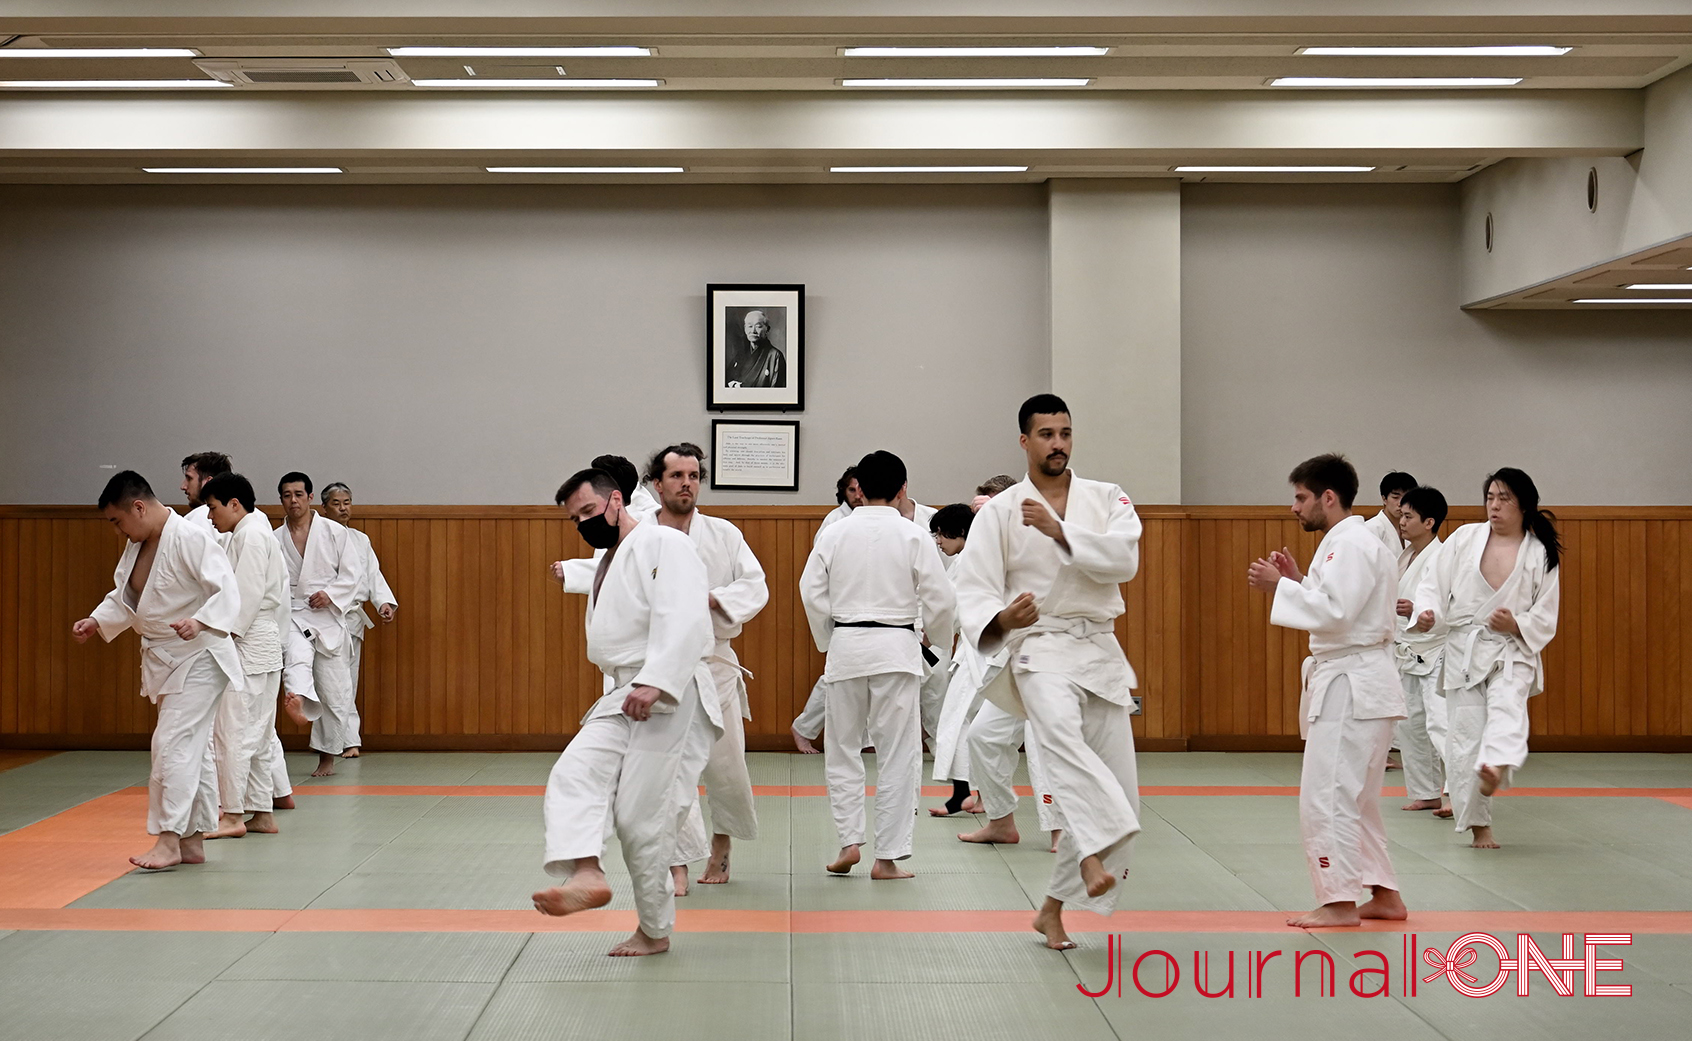 Foreigners from many countries studying at the Kodokan institute, the headquarter of Judo - photo by Journal-ONE